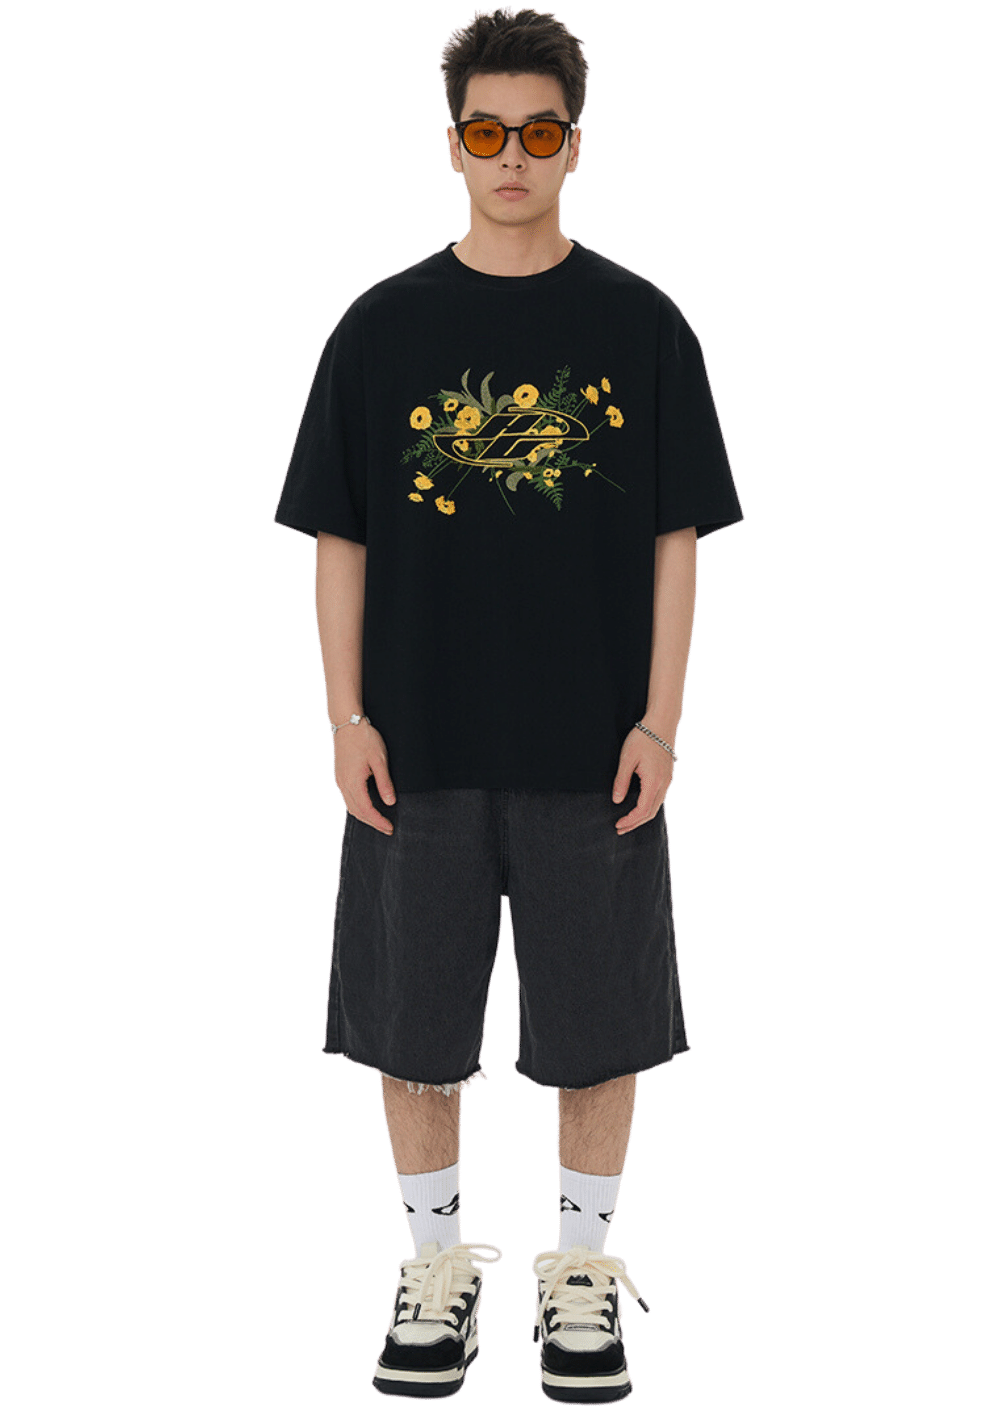 Floral Line Art Logo Embroidered  T-Shirt - PSYLOS 1, Floral Line Art Logo Embroidered  T-Shirt, T-Shirt, HARSH AND CRUEL, PSYLOS 1